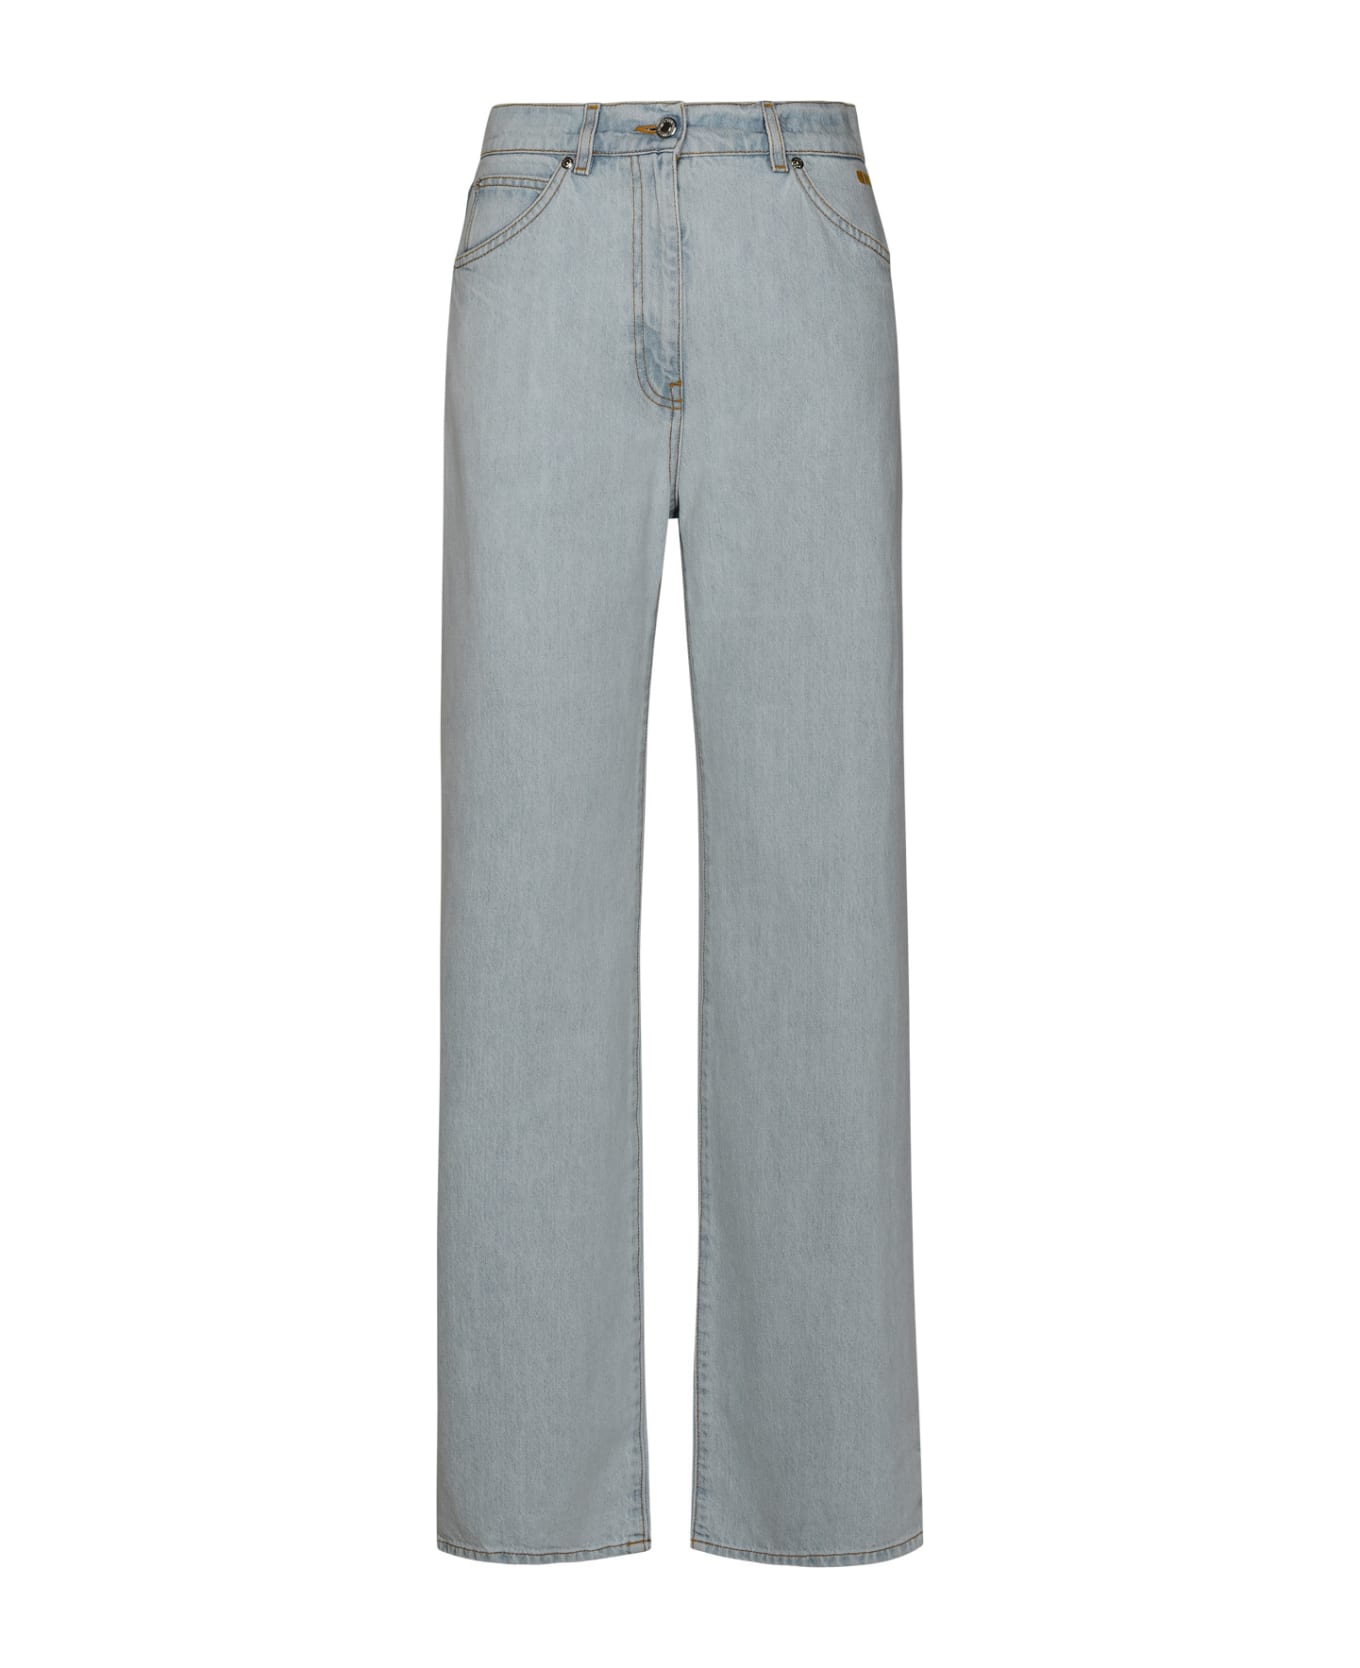 MSGM Flared Buttoned Jeans - Light Blue デニム